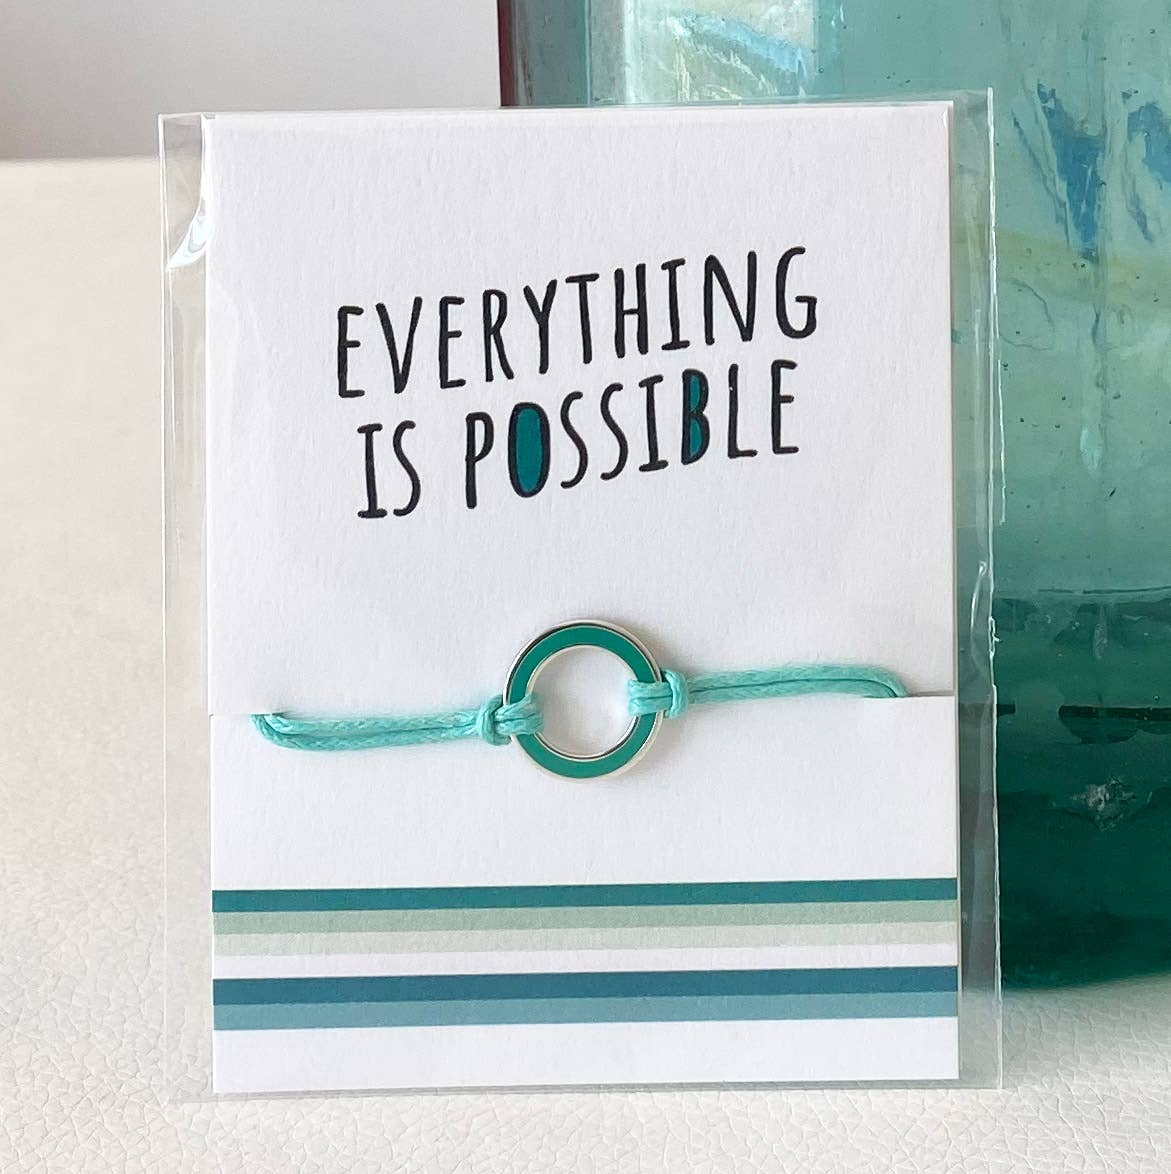 ‘Everything is possible’ Sentiment String Charm Bracelet - The Little Jewellery Company